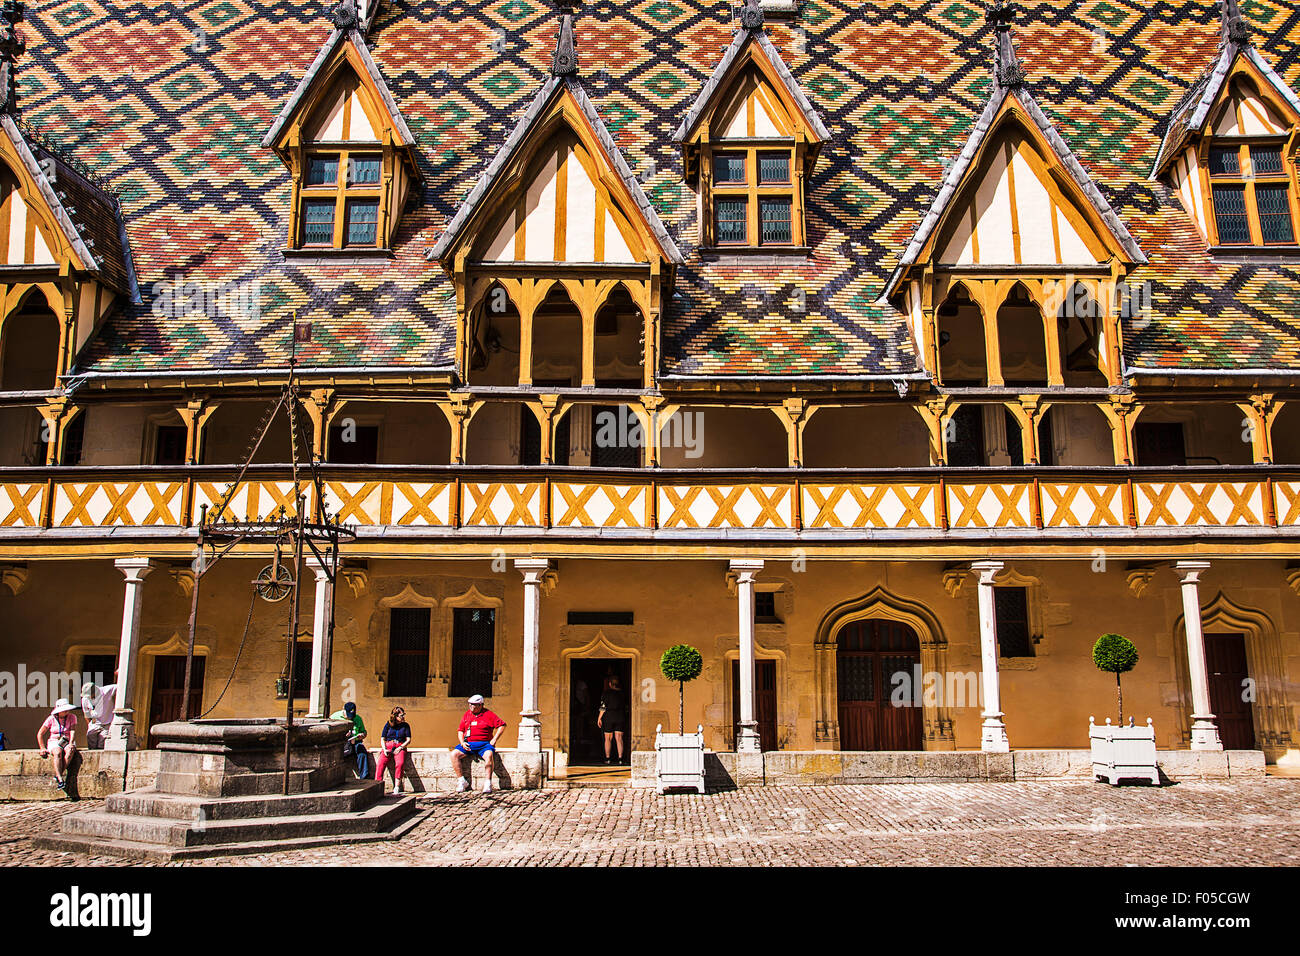 A medieval hospital in the town of Beaune, France, in the Burgundy region, the Hotel-Dieu is now a museum... Stock Photo